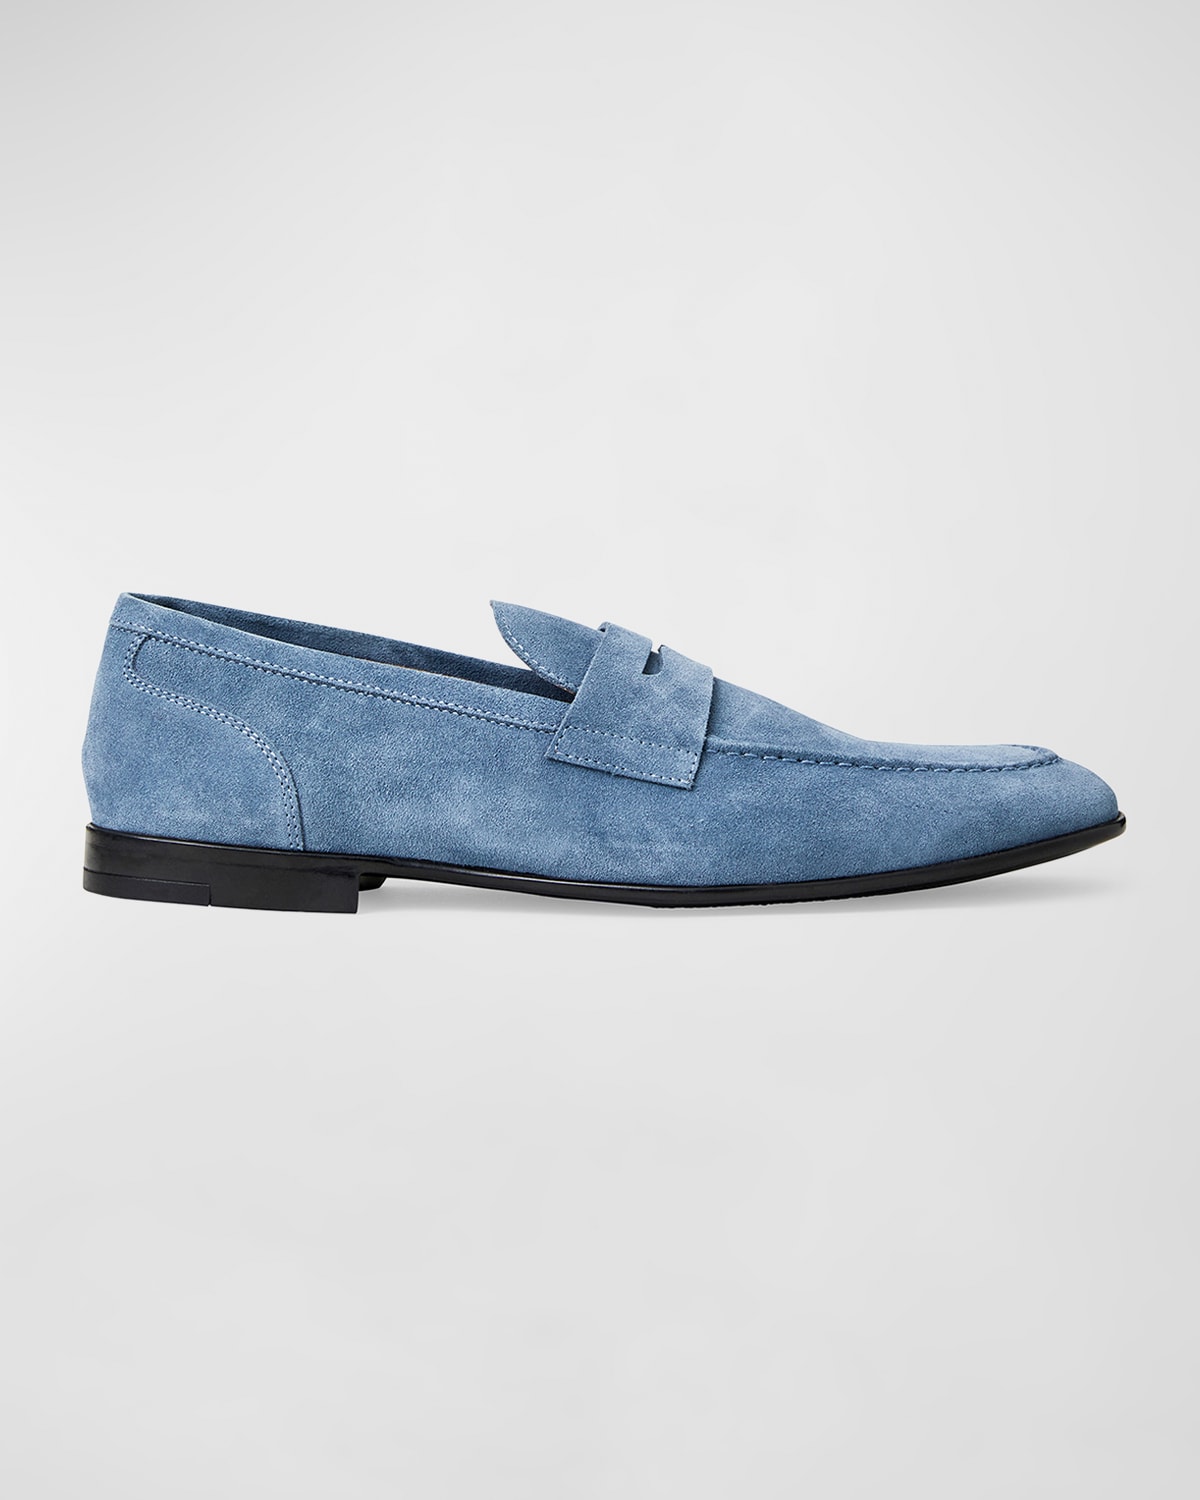 Bruno Magli Men's Suede Penny Loafers